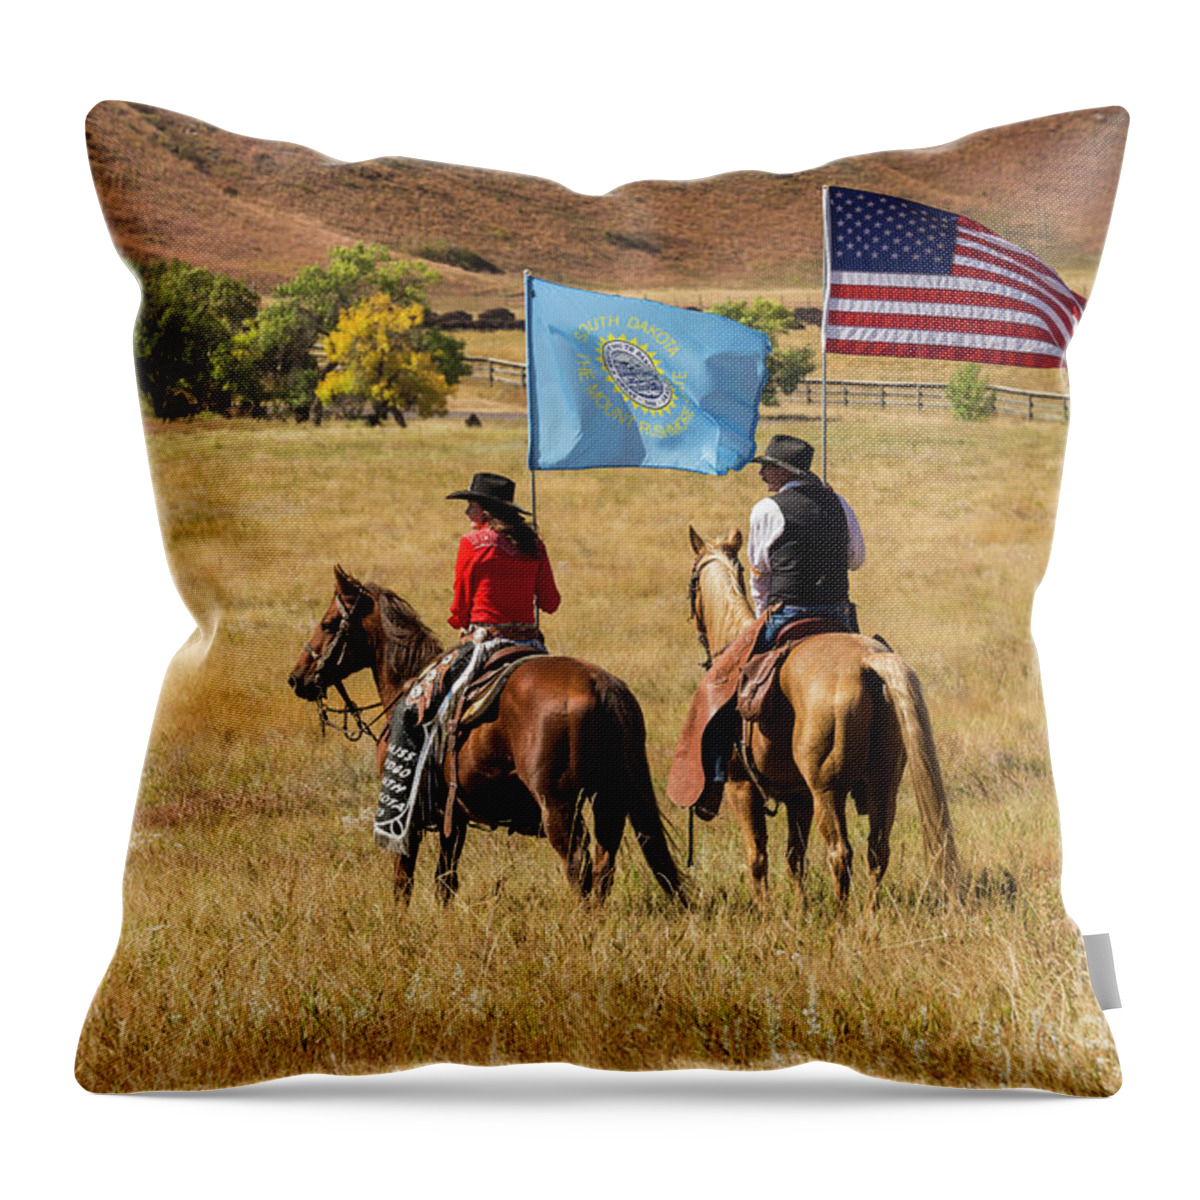 South Dakota Throw Pillow featuring the photograph State and Country by Steve Triplett